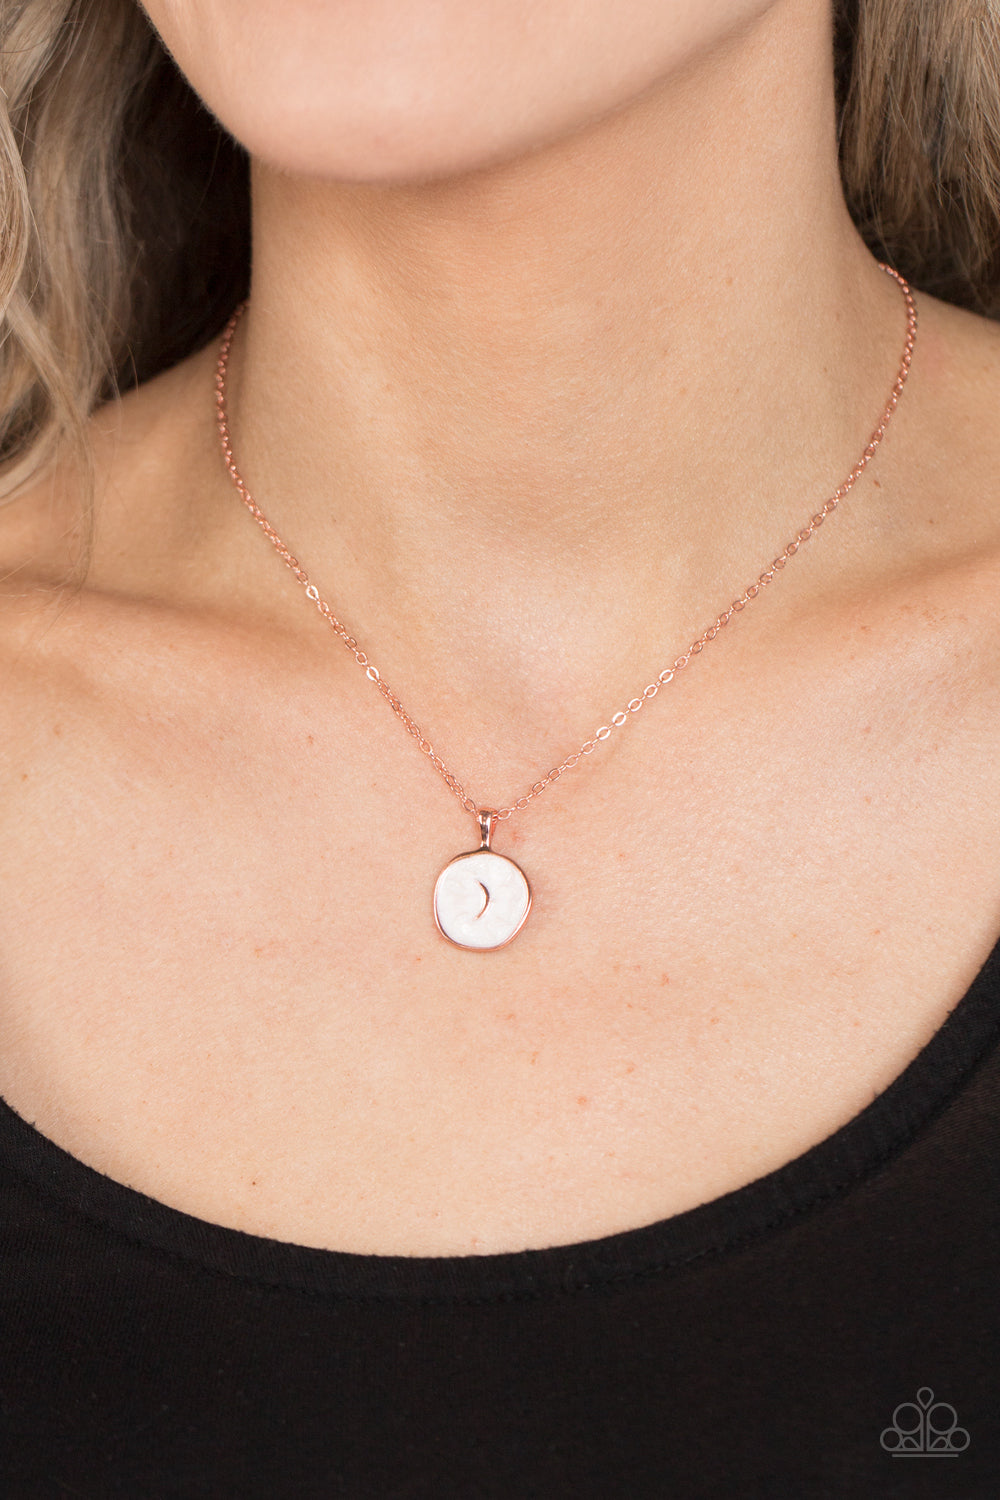 Moon Magic - Copper Dainty Moon/White Lacquer Finish Pendant Paparazzi Necklace & matching earrings